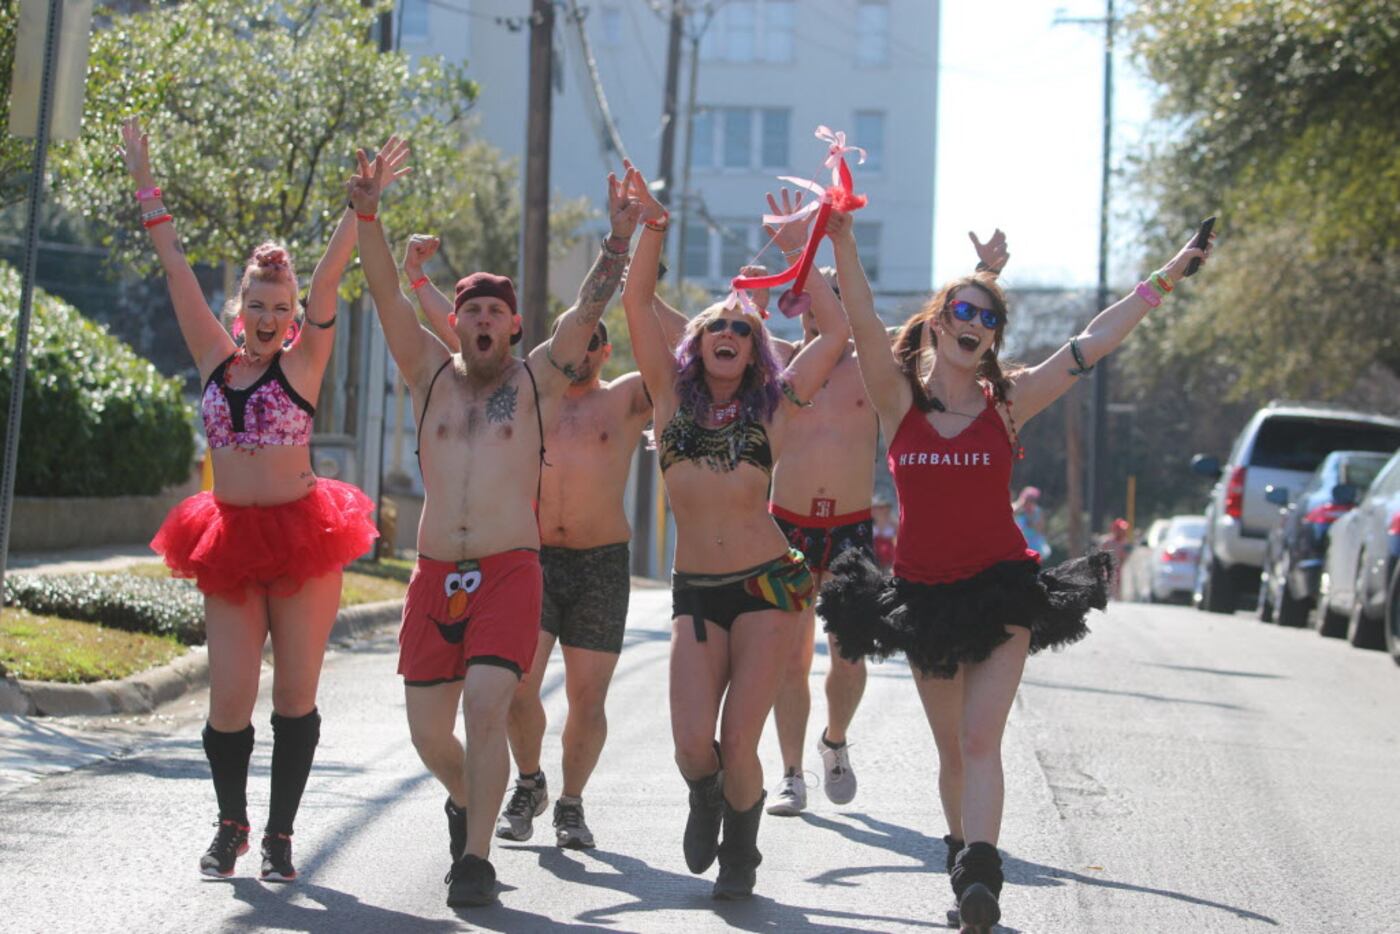 Cupid Undie Run was held on Feb 13, 2016 headquartered at 6th Street Bar in Uptown and...